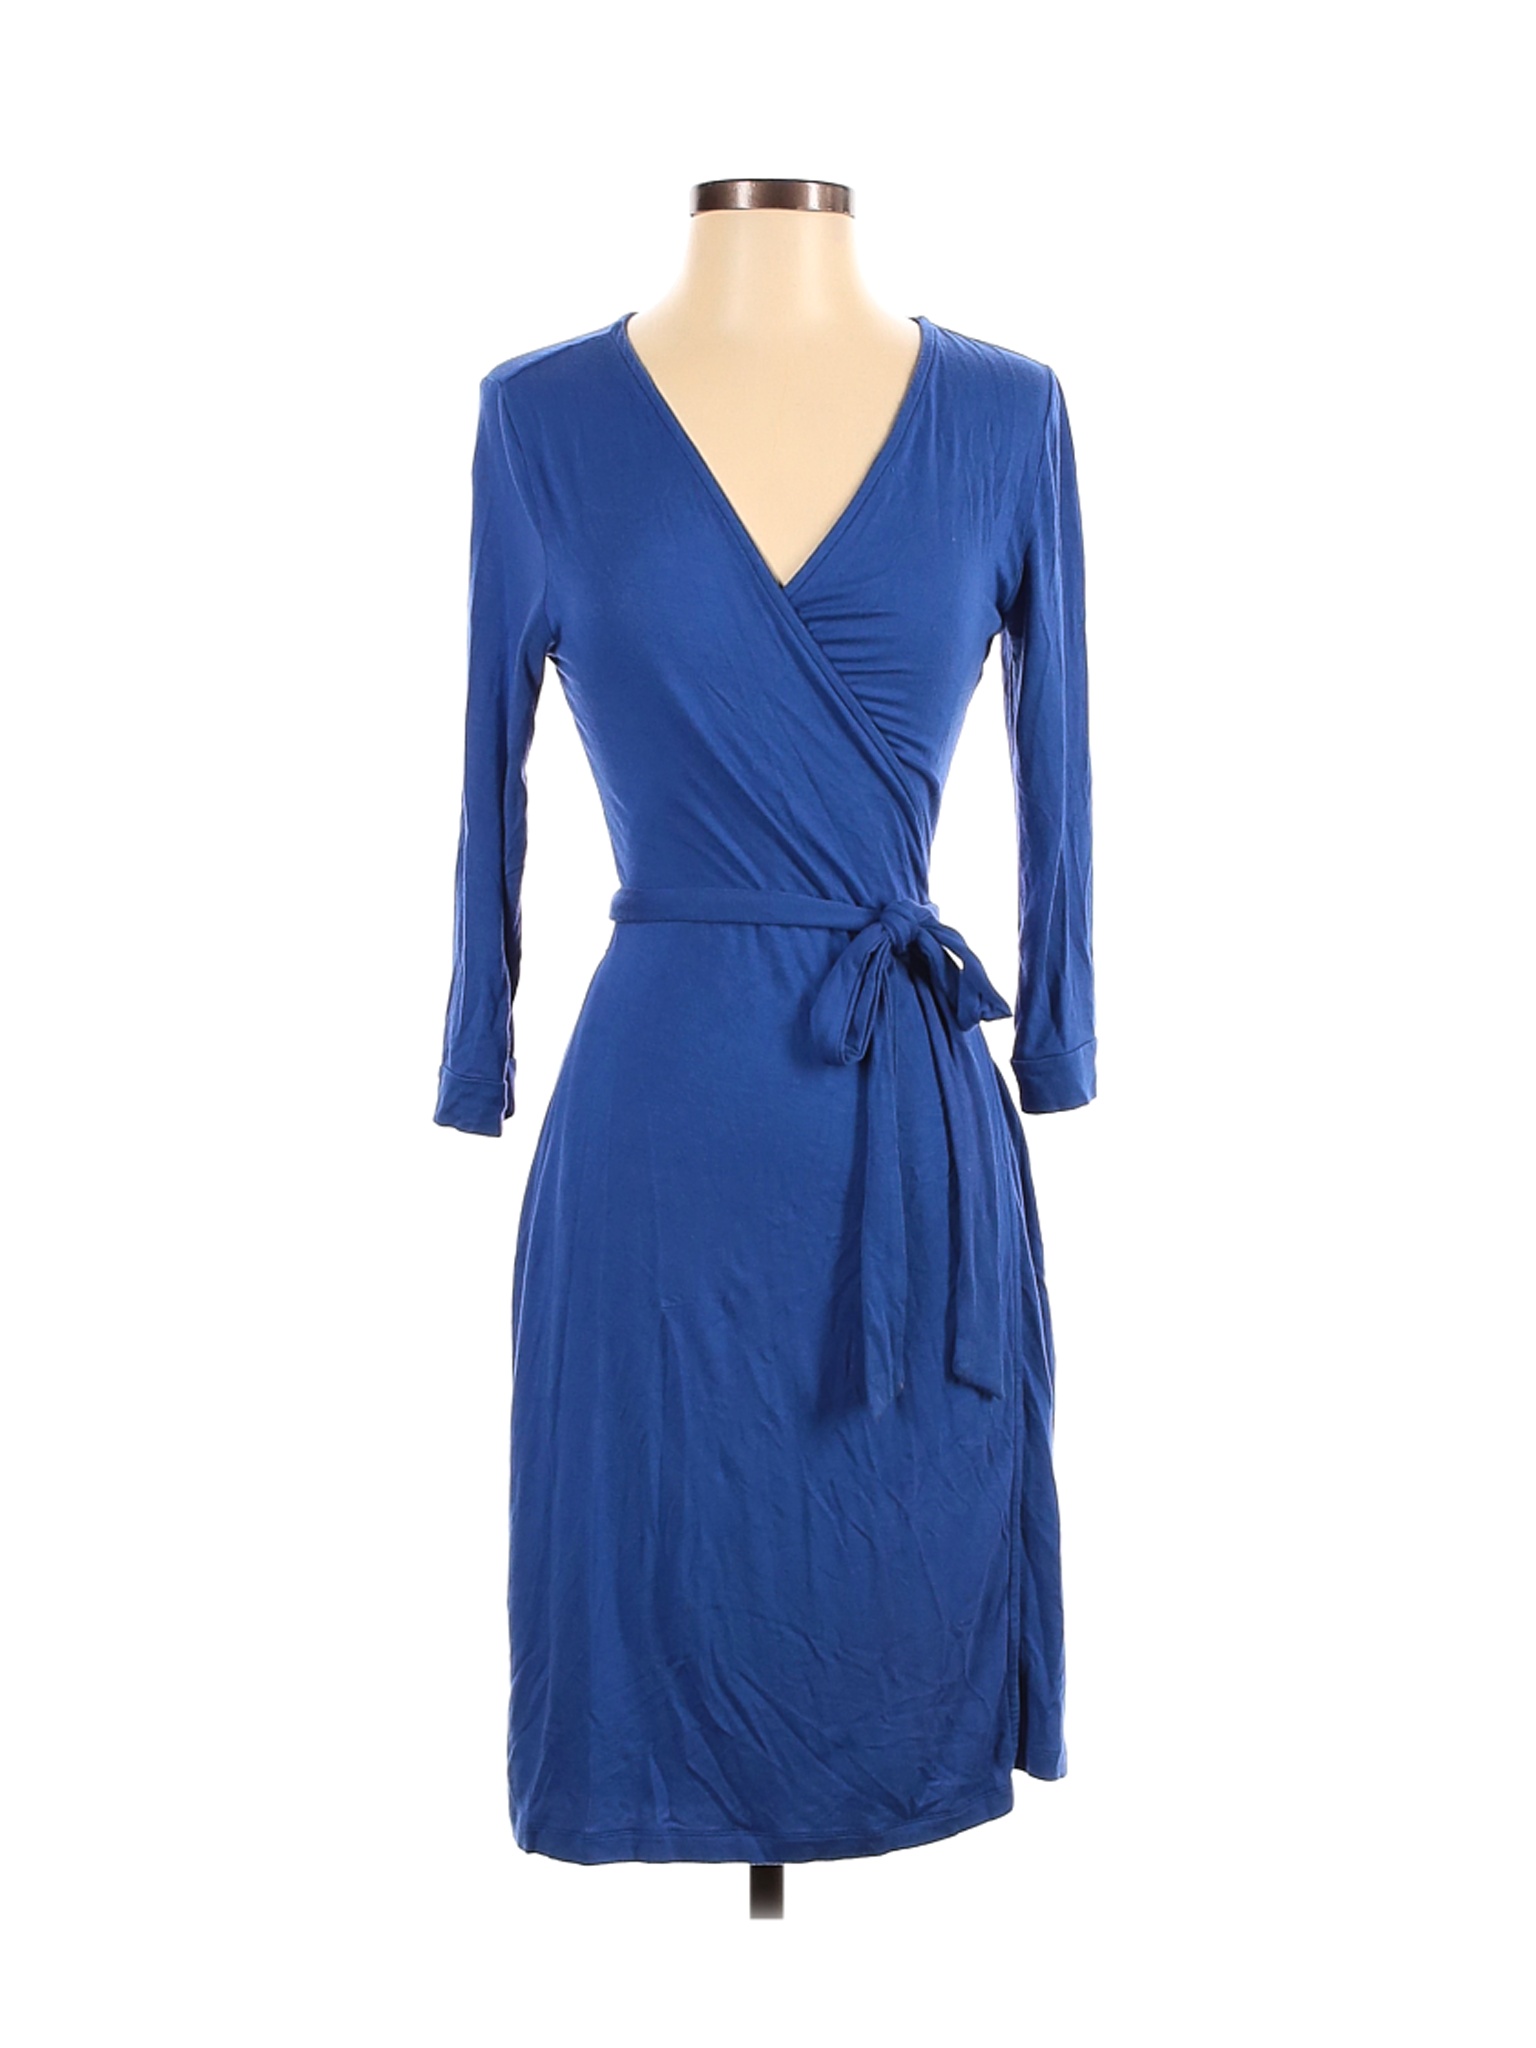 Ava And Aiden Women Blue Casual Dress S Ebay 